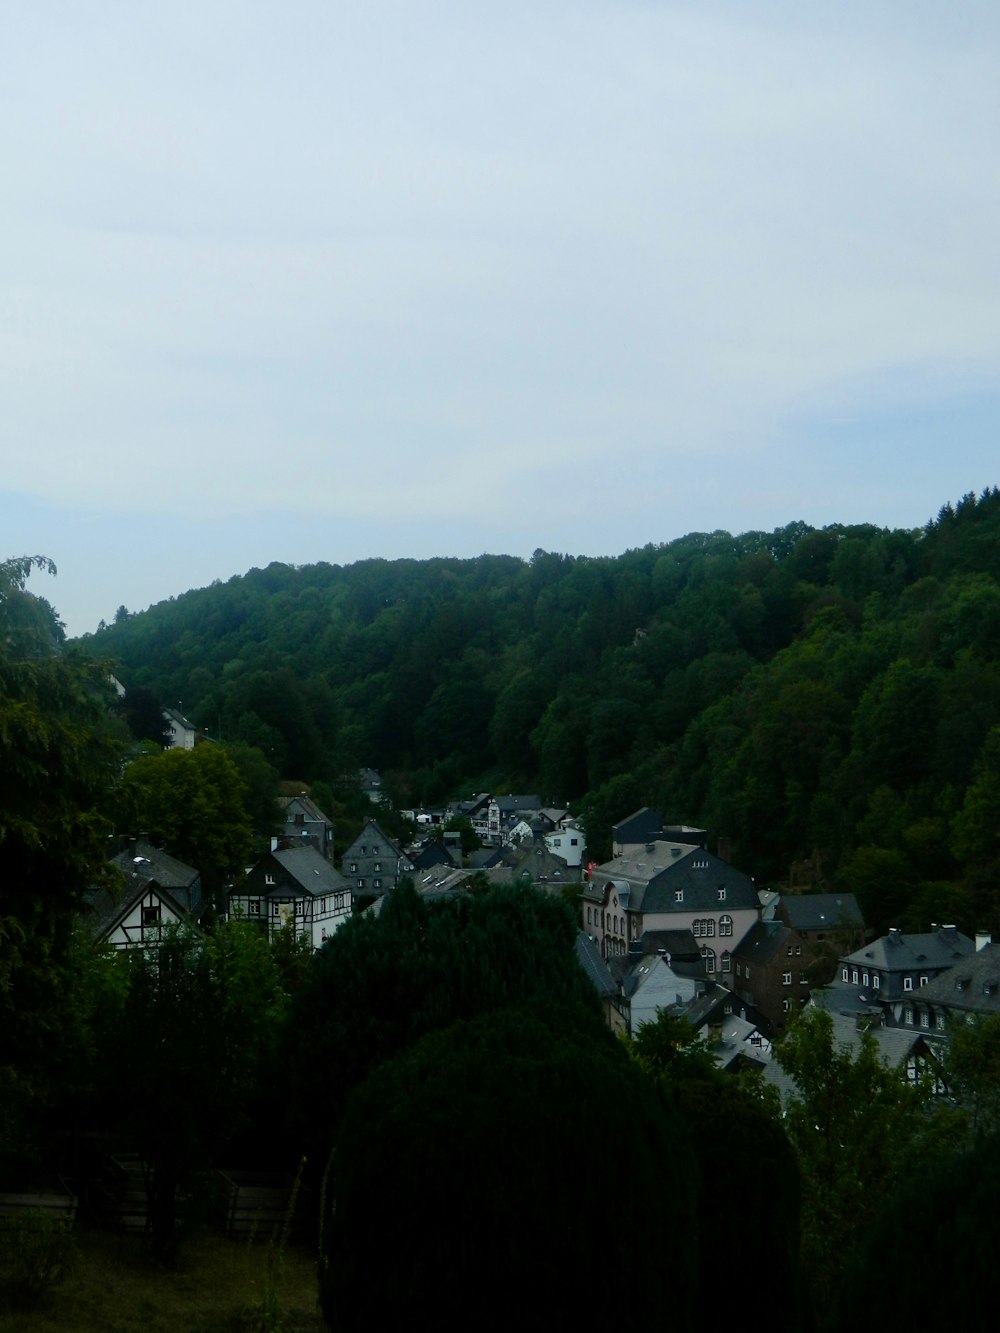 a view of a small town in the middle of a forest